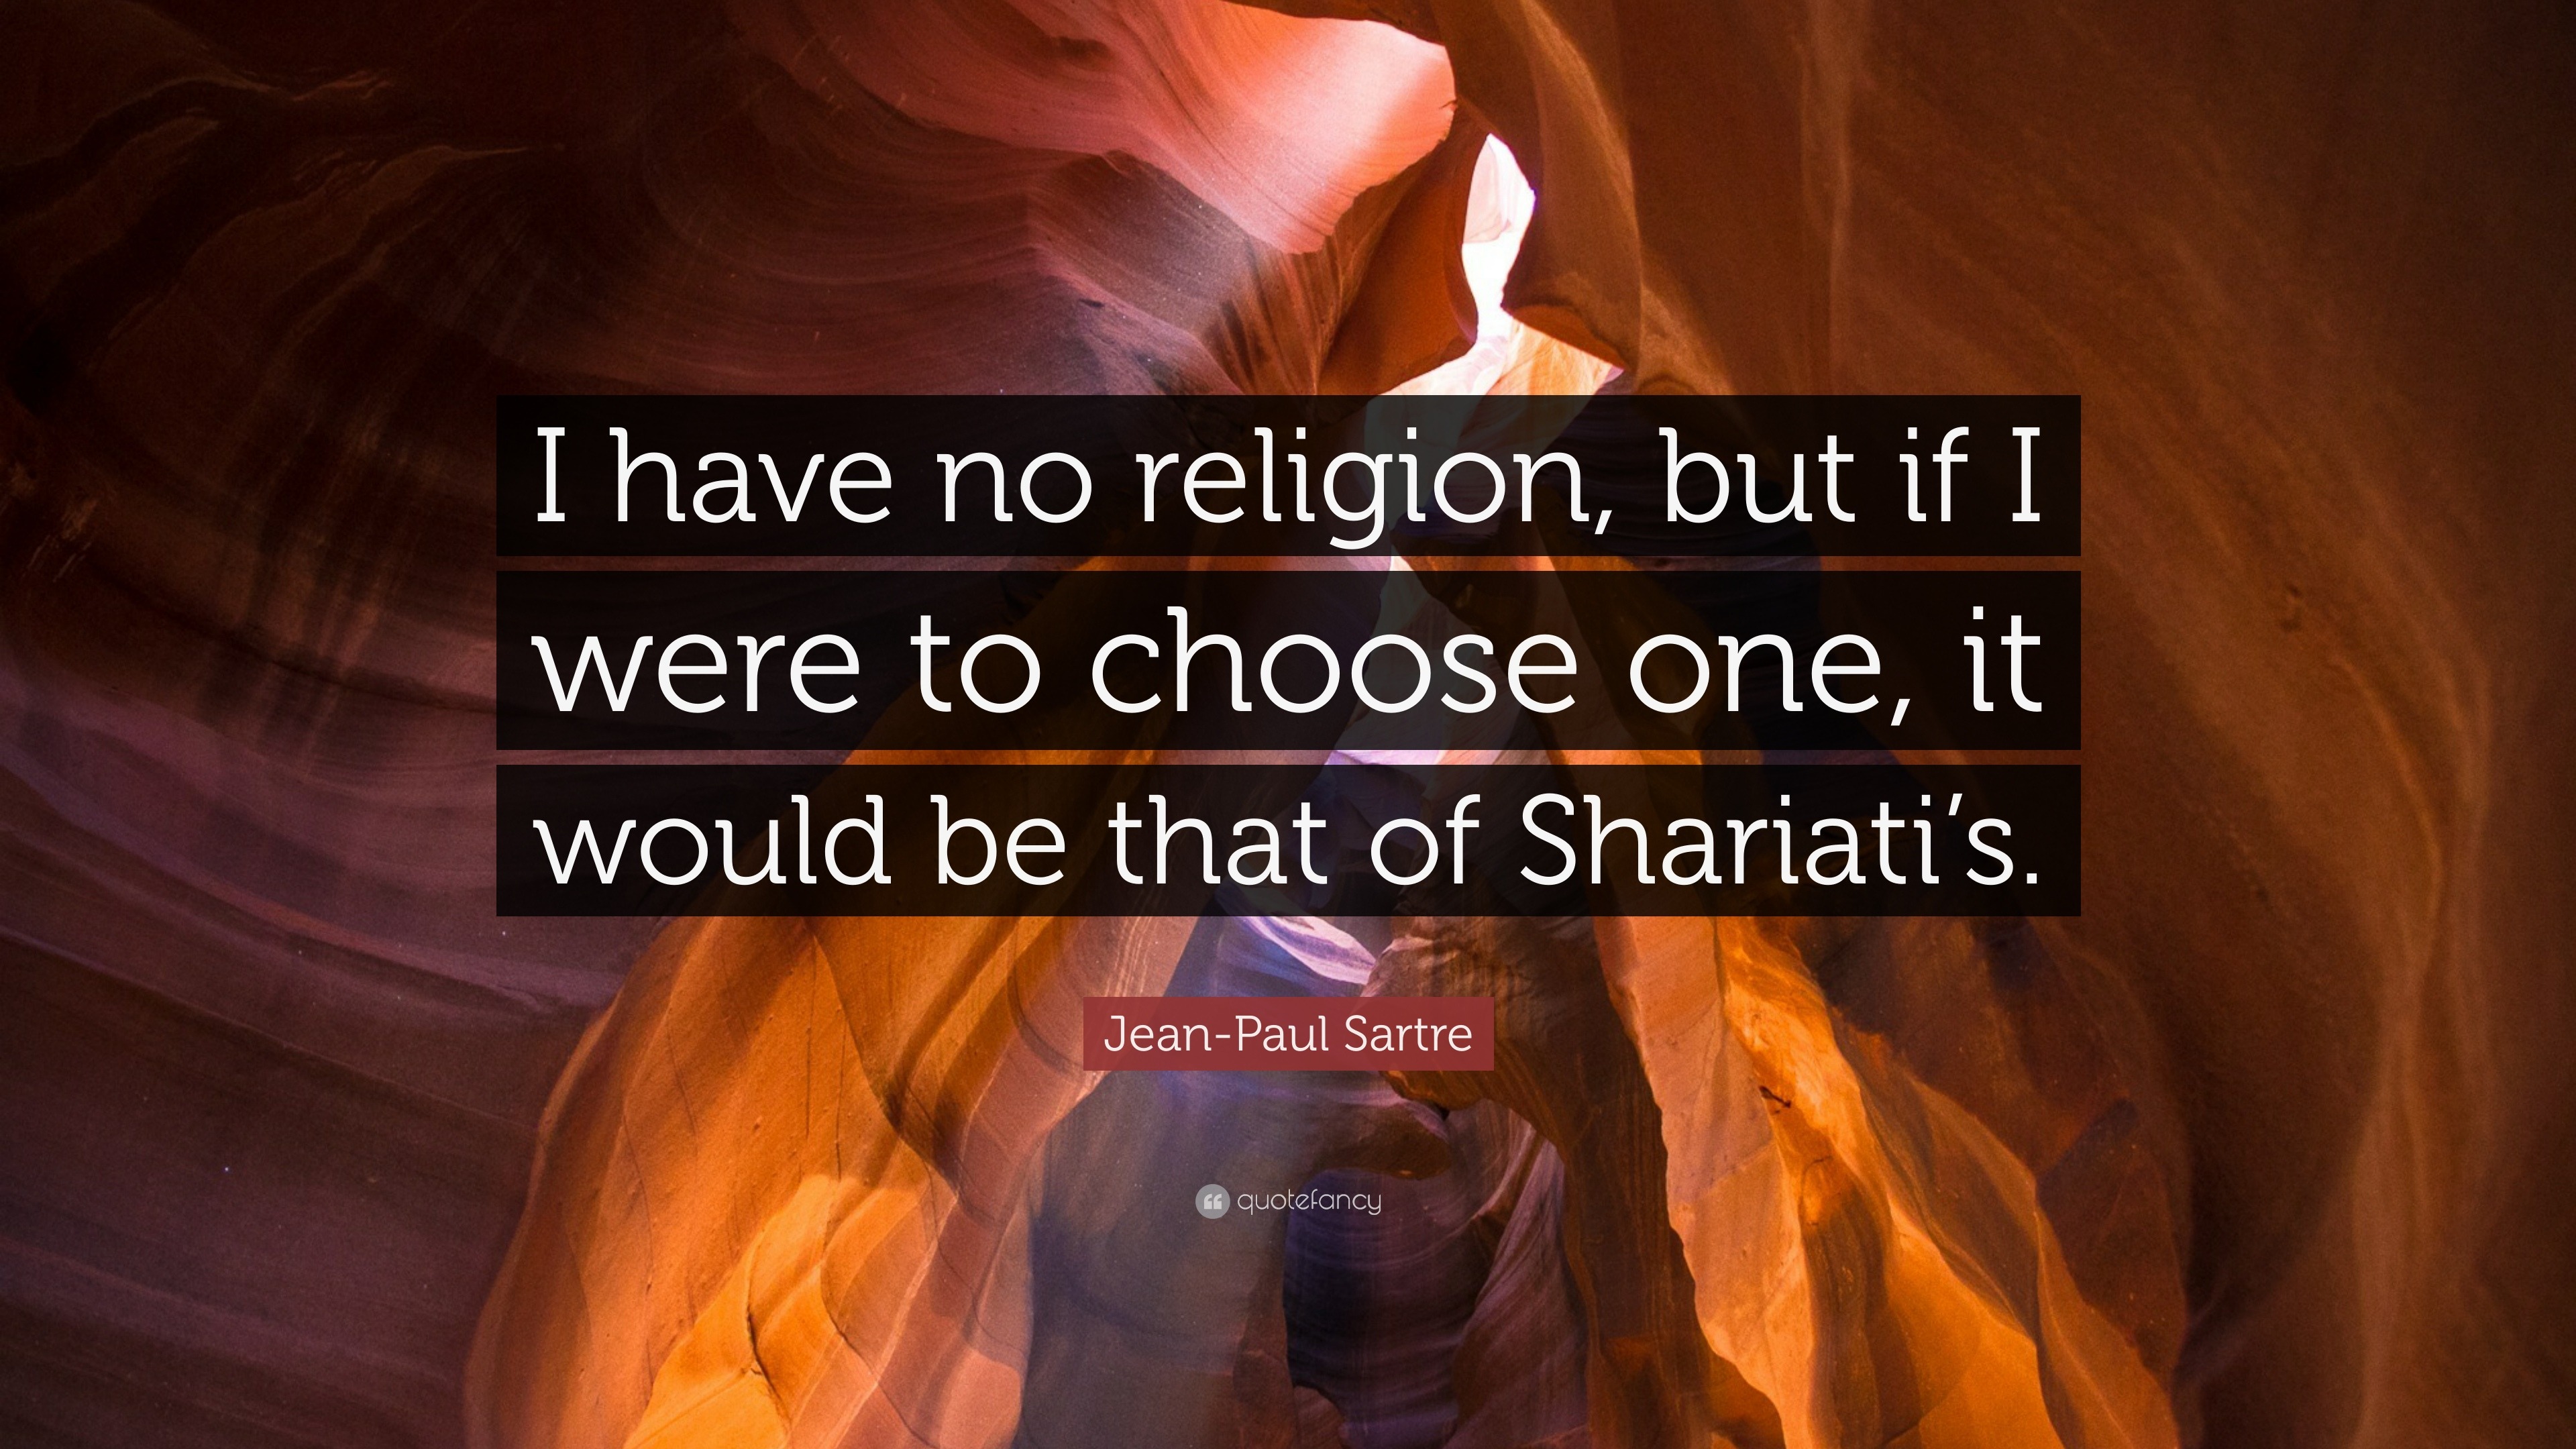 Jean-Paul Sartre Quote: “I have no religion, but if I were to choose ...